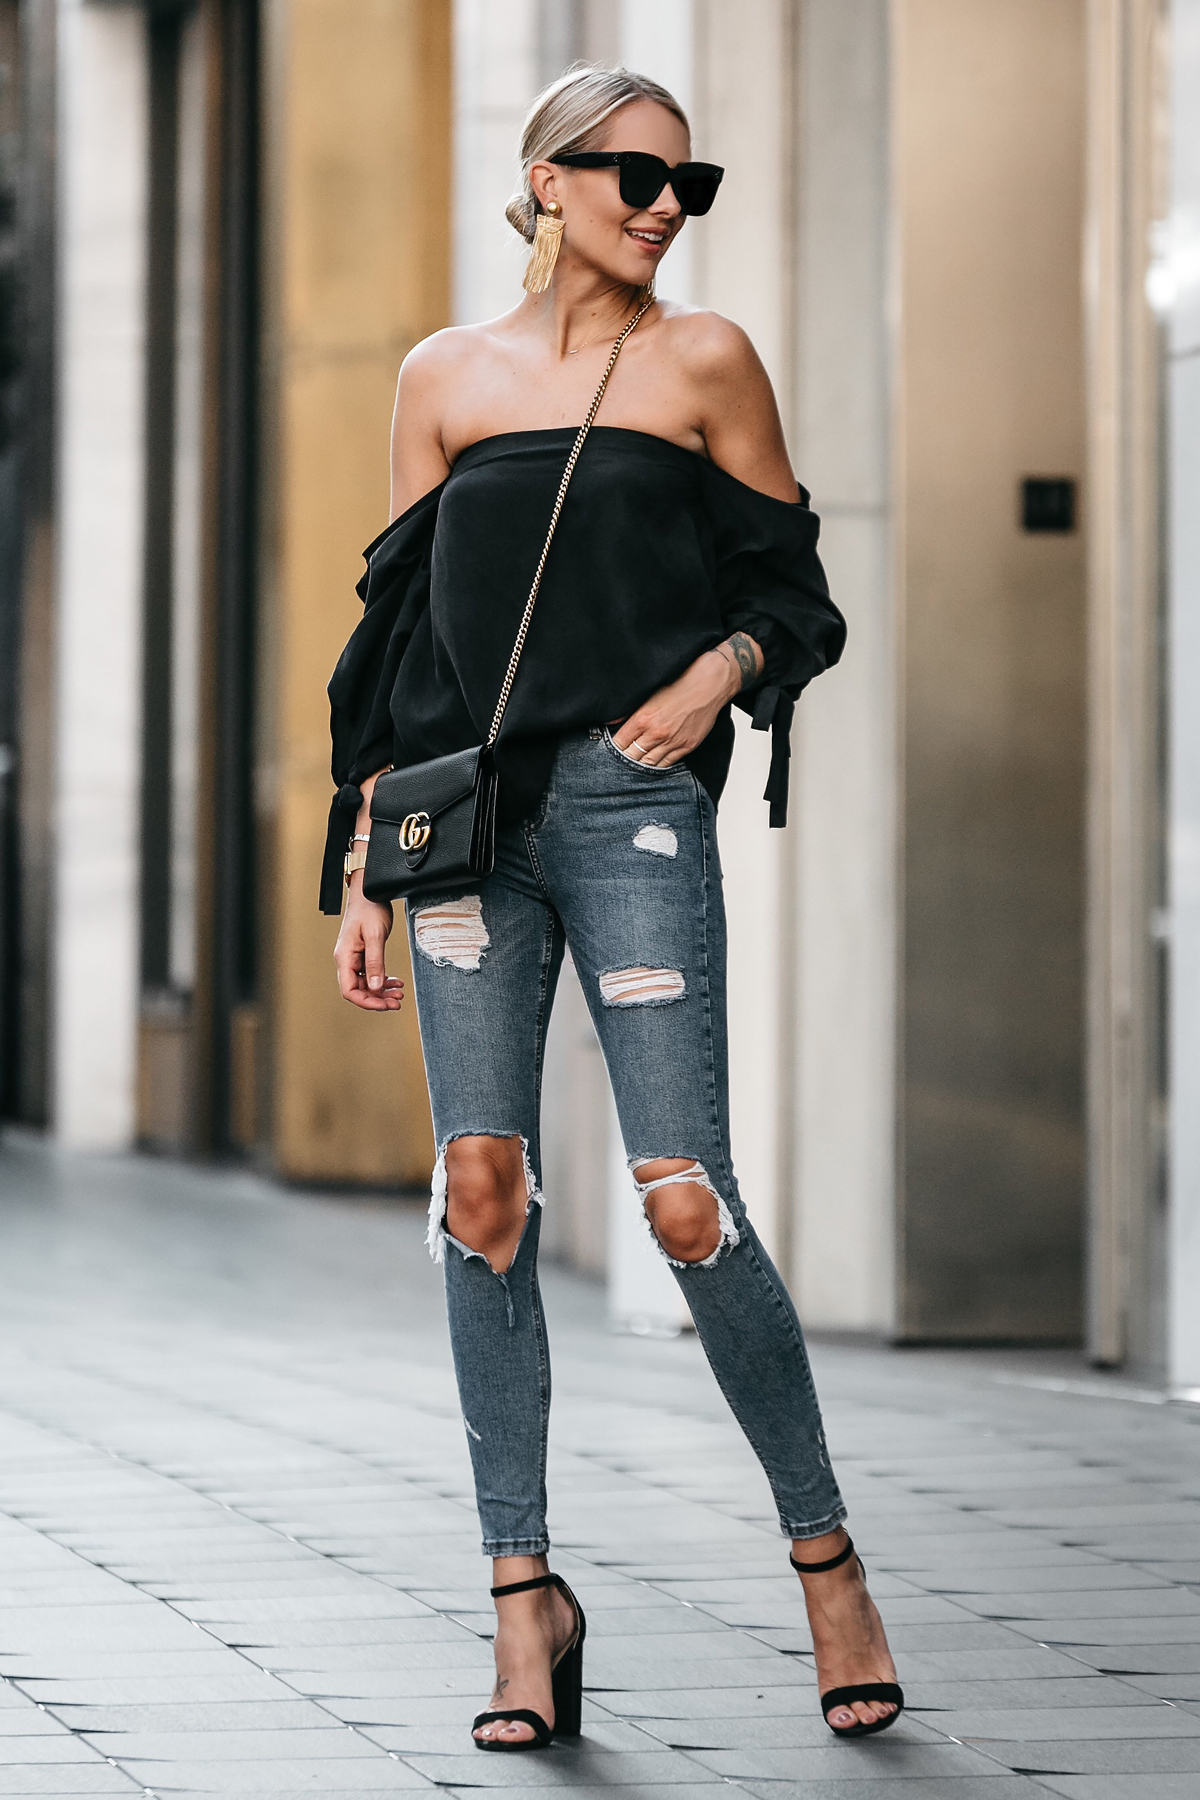 Blonde Woman Wearing Club Monaco Black Off-the-Shoulder Top Denim Ripped Skinny Jeans Outfit Black Ankle Strap Heels Gucci Marmont Handbag